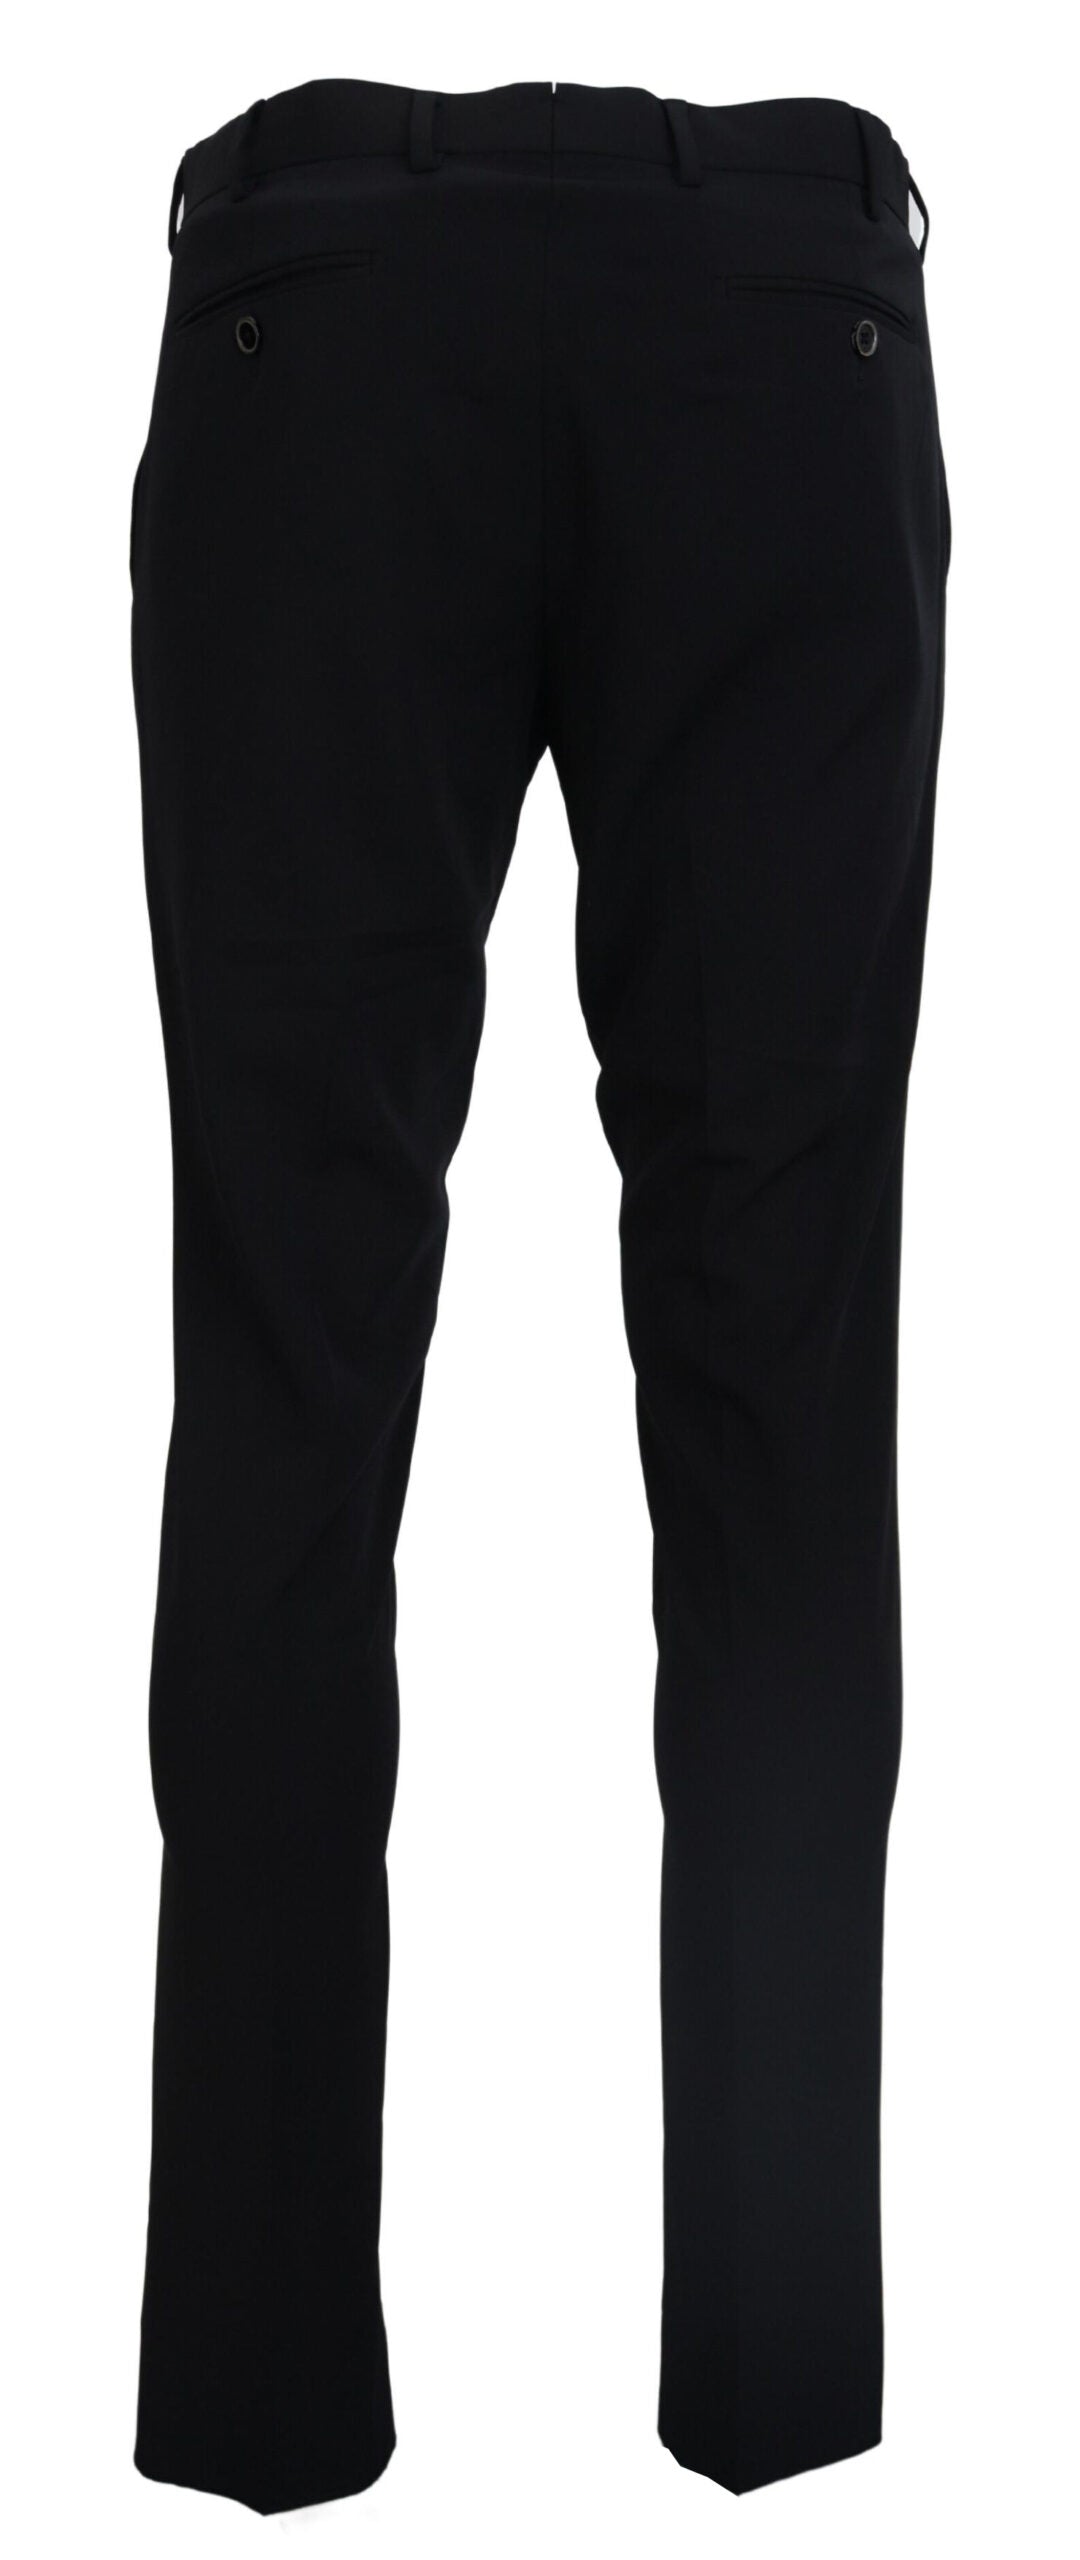 Domenico Tagliente Black Tapered Dress Formal Pants - Designed by Domenico Tagliente Available to Buy at a Discounted Price on Moon Behind The Hill Online Designer Discount Store